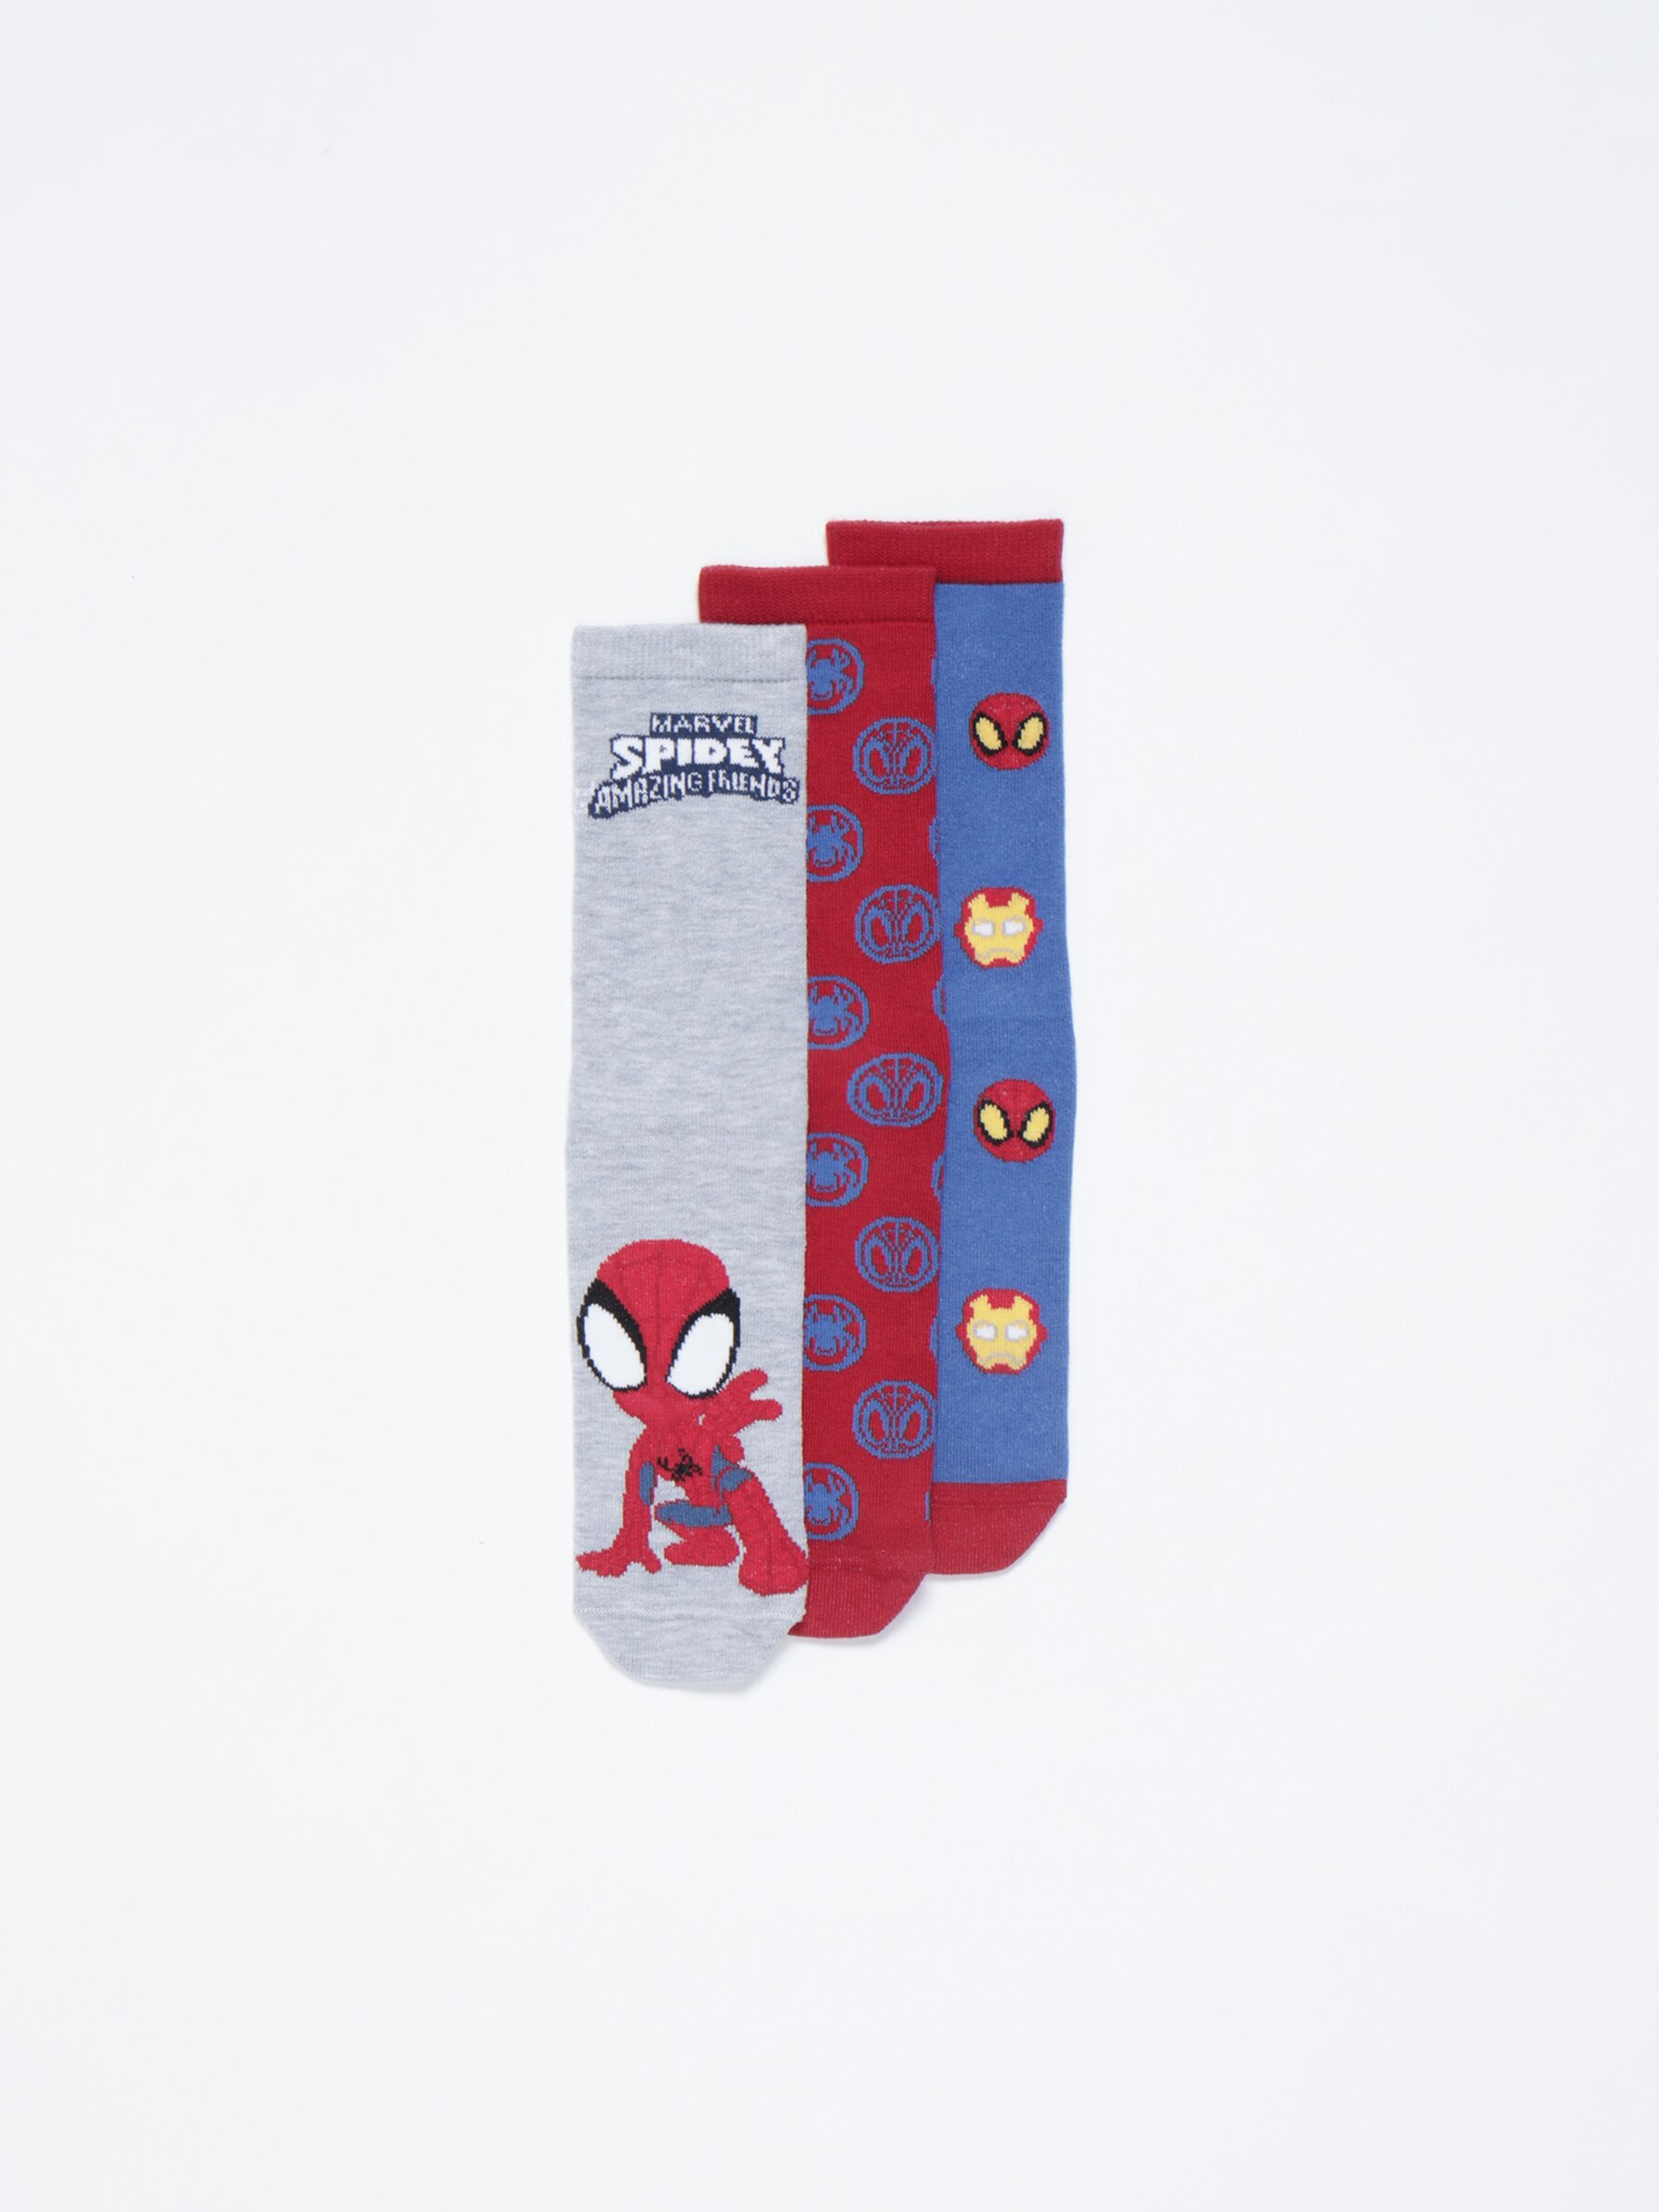 Socks Marvel - Spider-Man  Clothes and accessories for